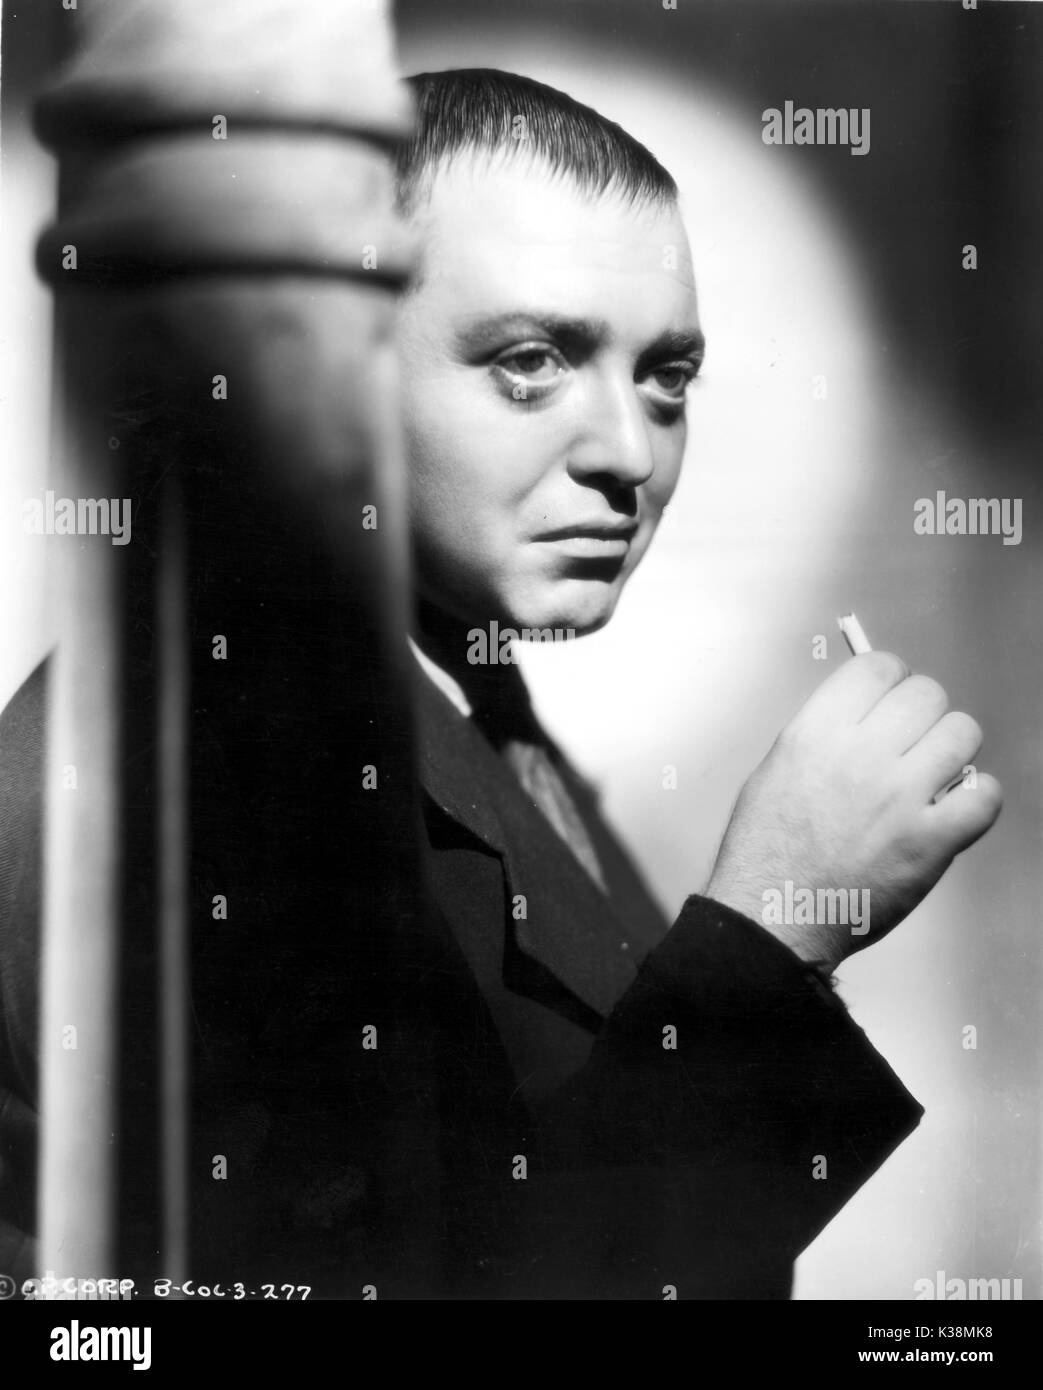 CRIME AND PUNISHMENT PETER LORRE Stock Photo - Alamy